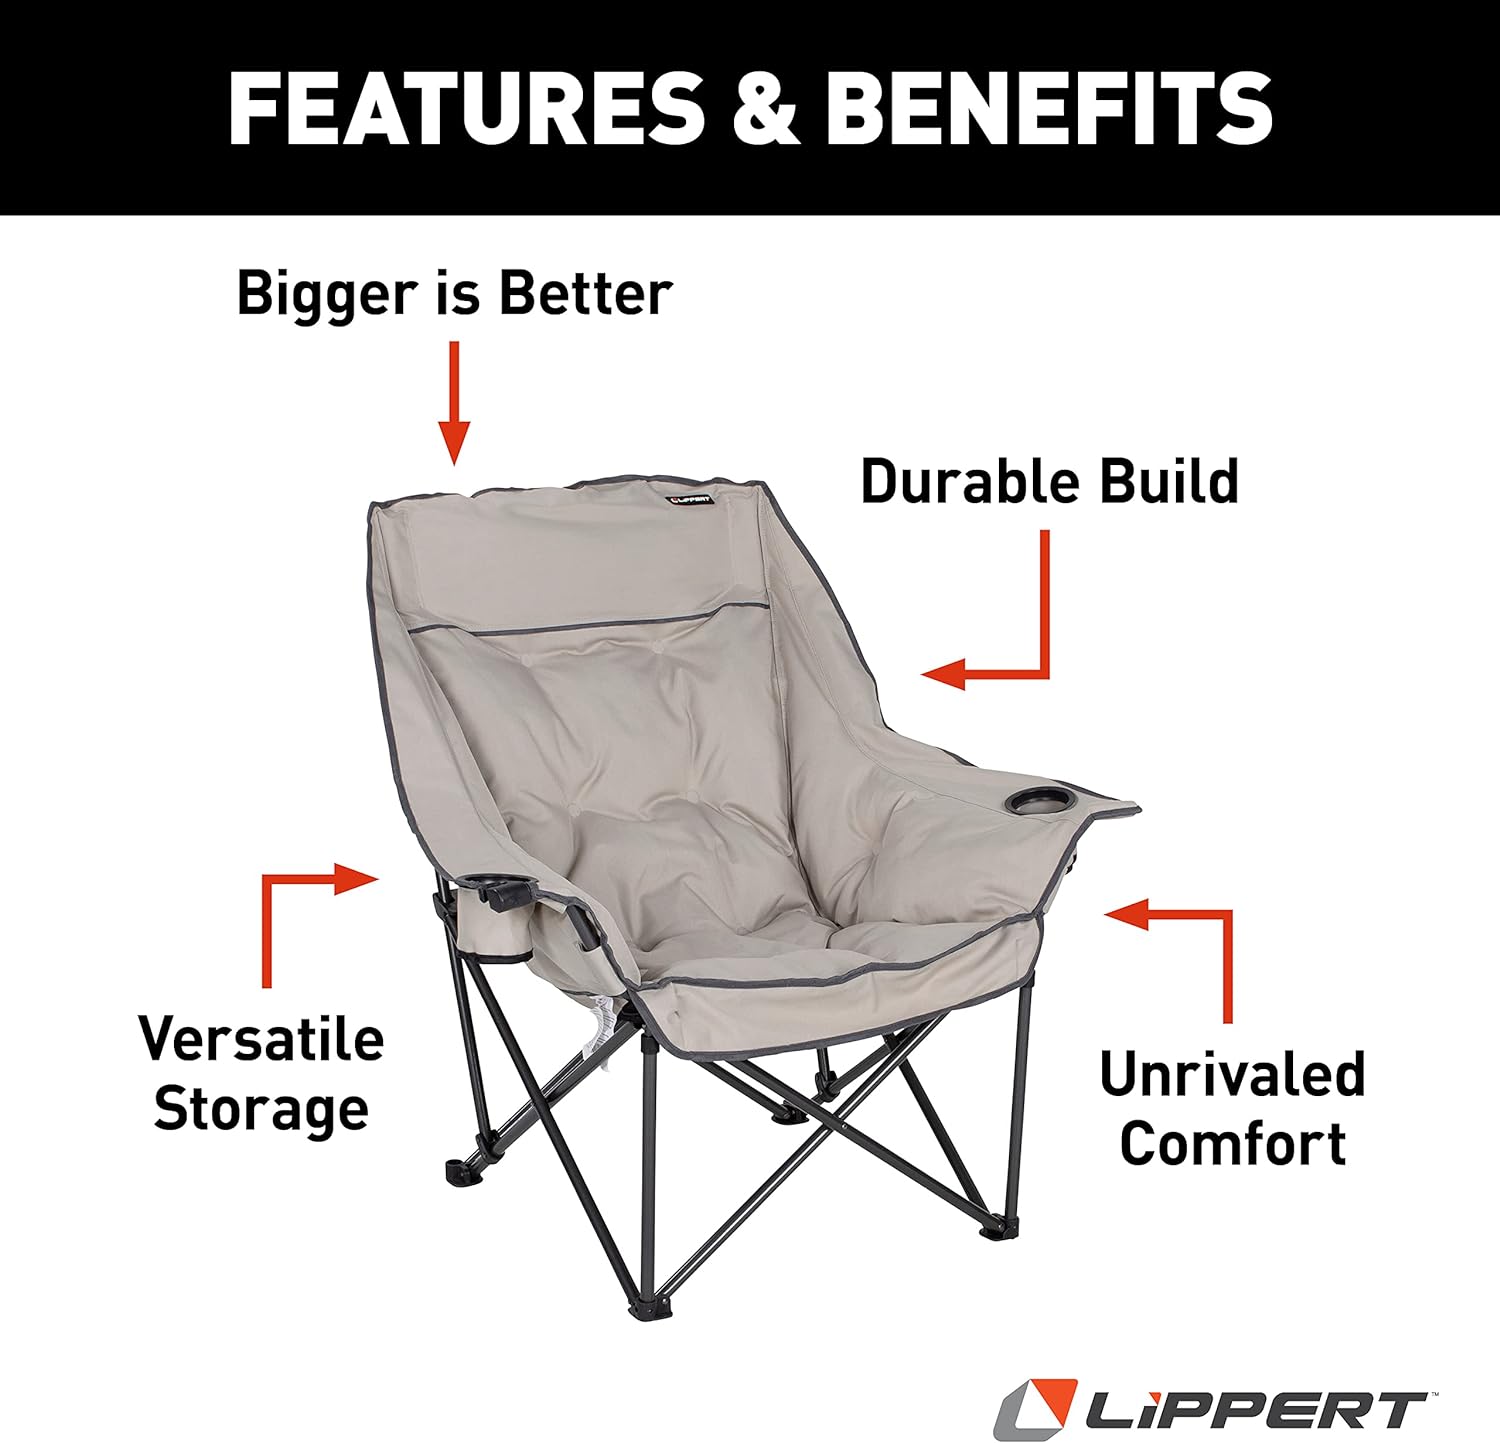 Lippert Big Bear Padded Camping Chair with 400-lb. Weight Capacity, Carry Bag, Durable Mesh Fabrics, High-Loft Cushioning, Dual Cupholders, Stemmed Wine Glass Holder (Sand) - 2021010667